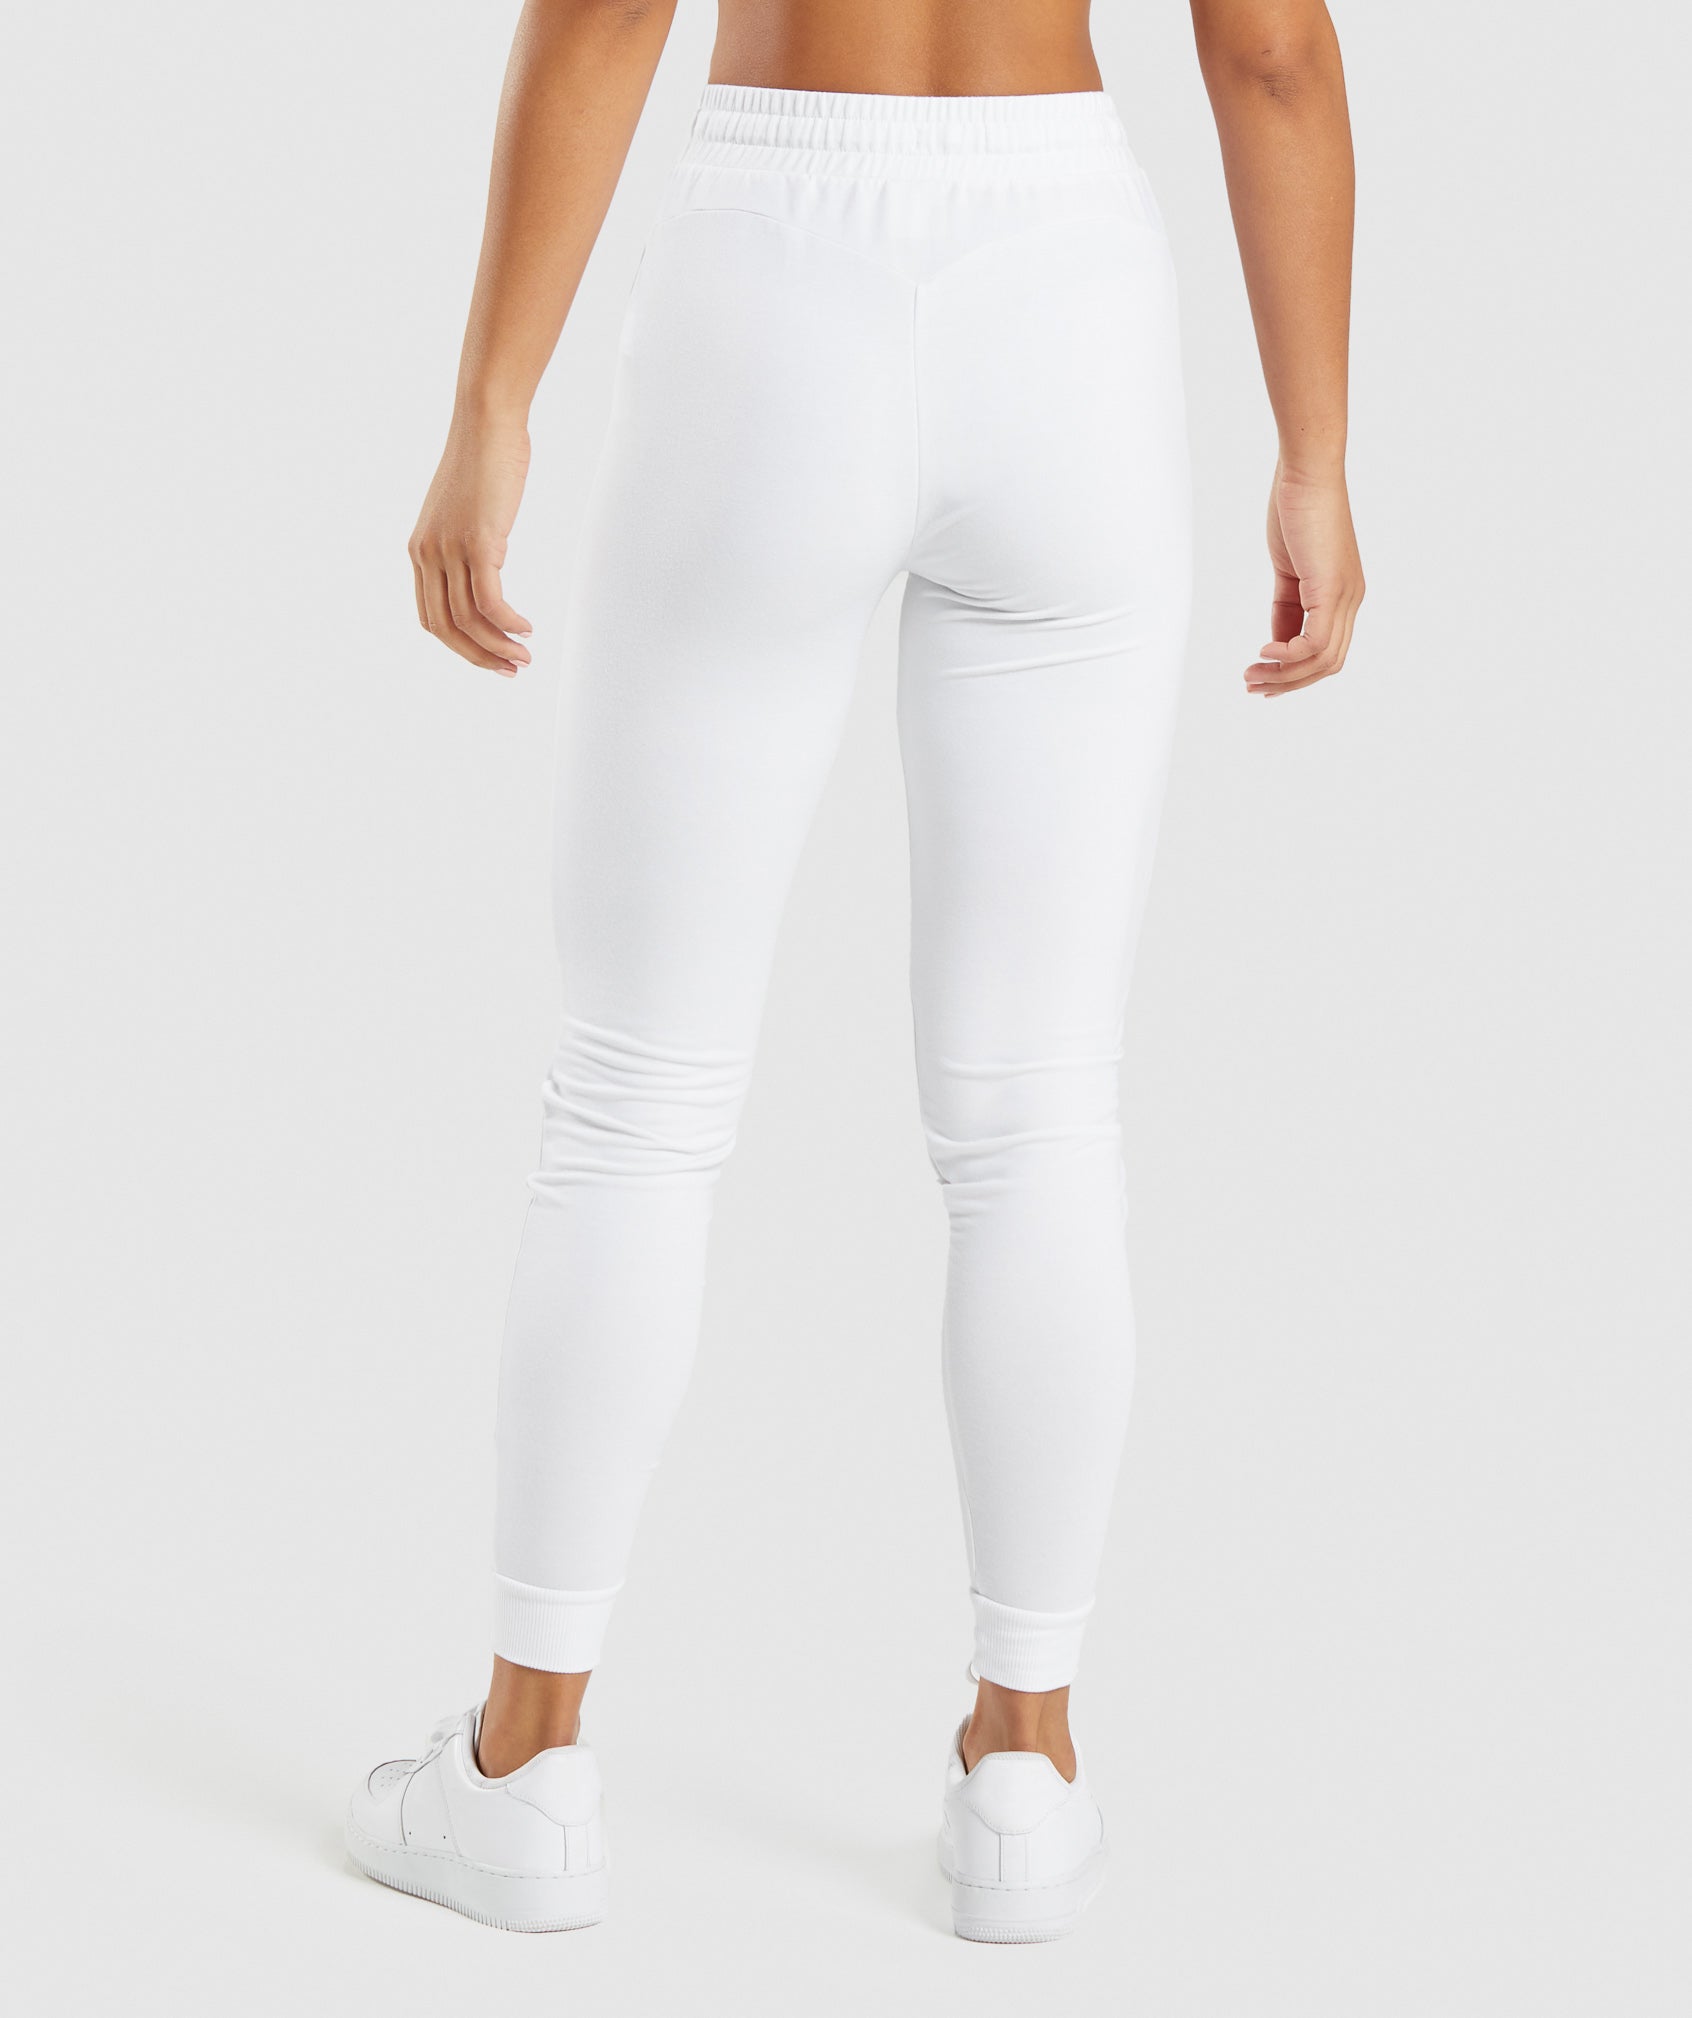 Training Pippa Joggers in White